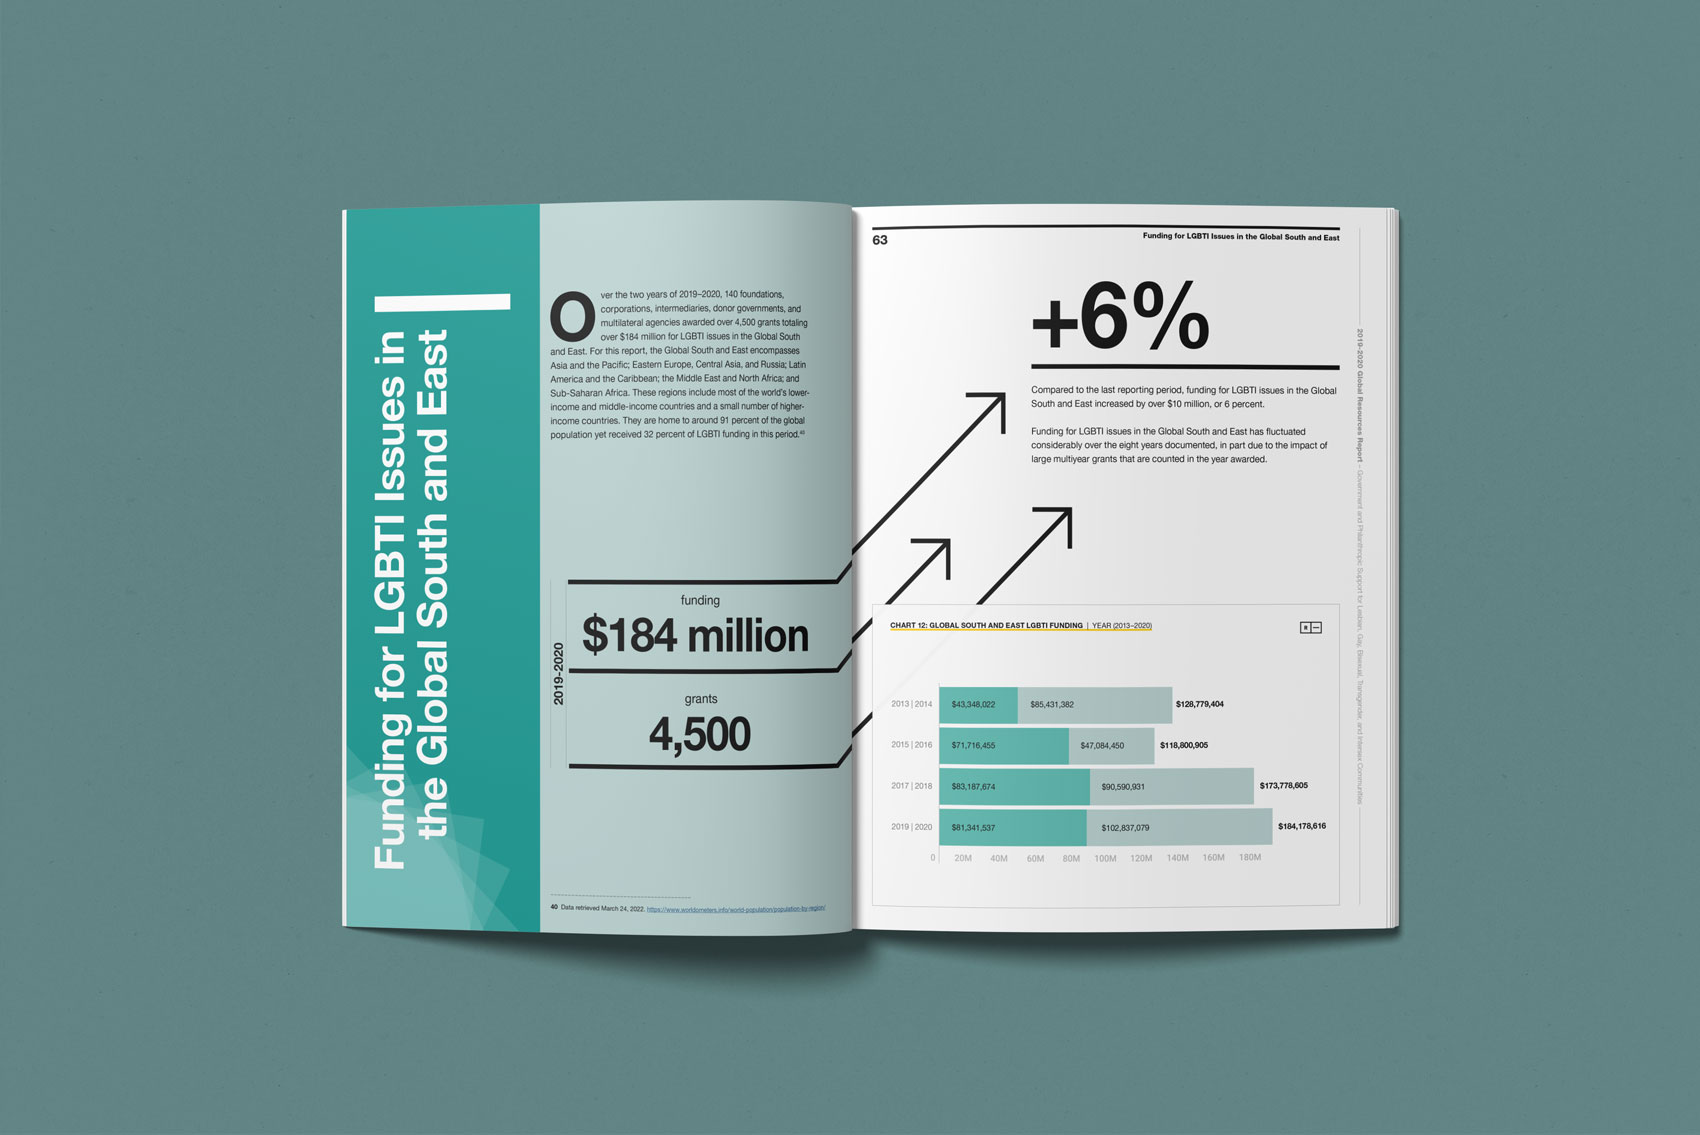 2019–2020 Global Resources Report